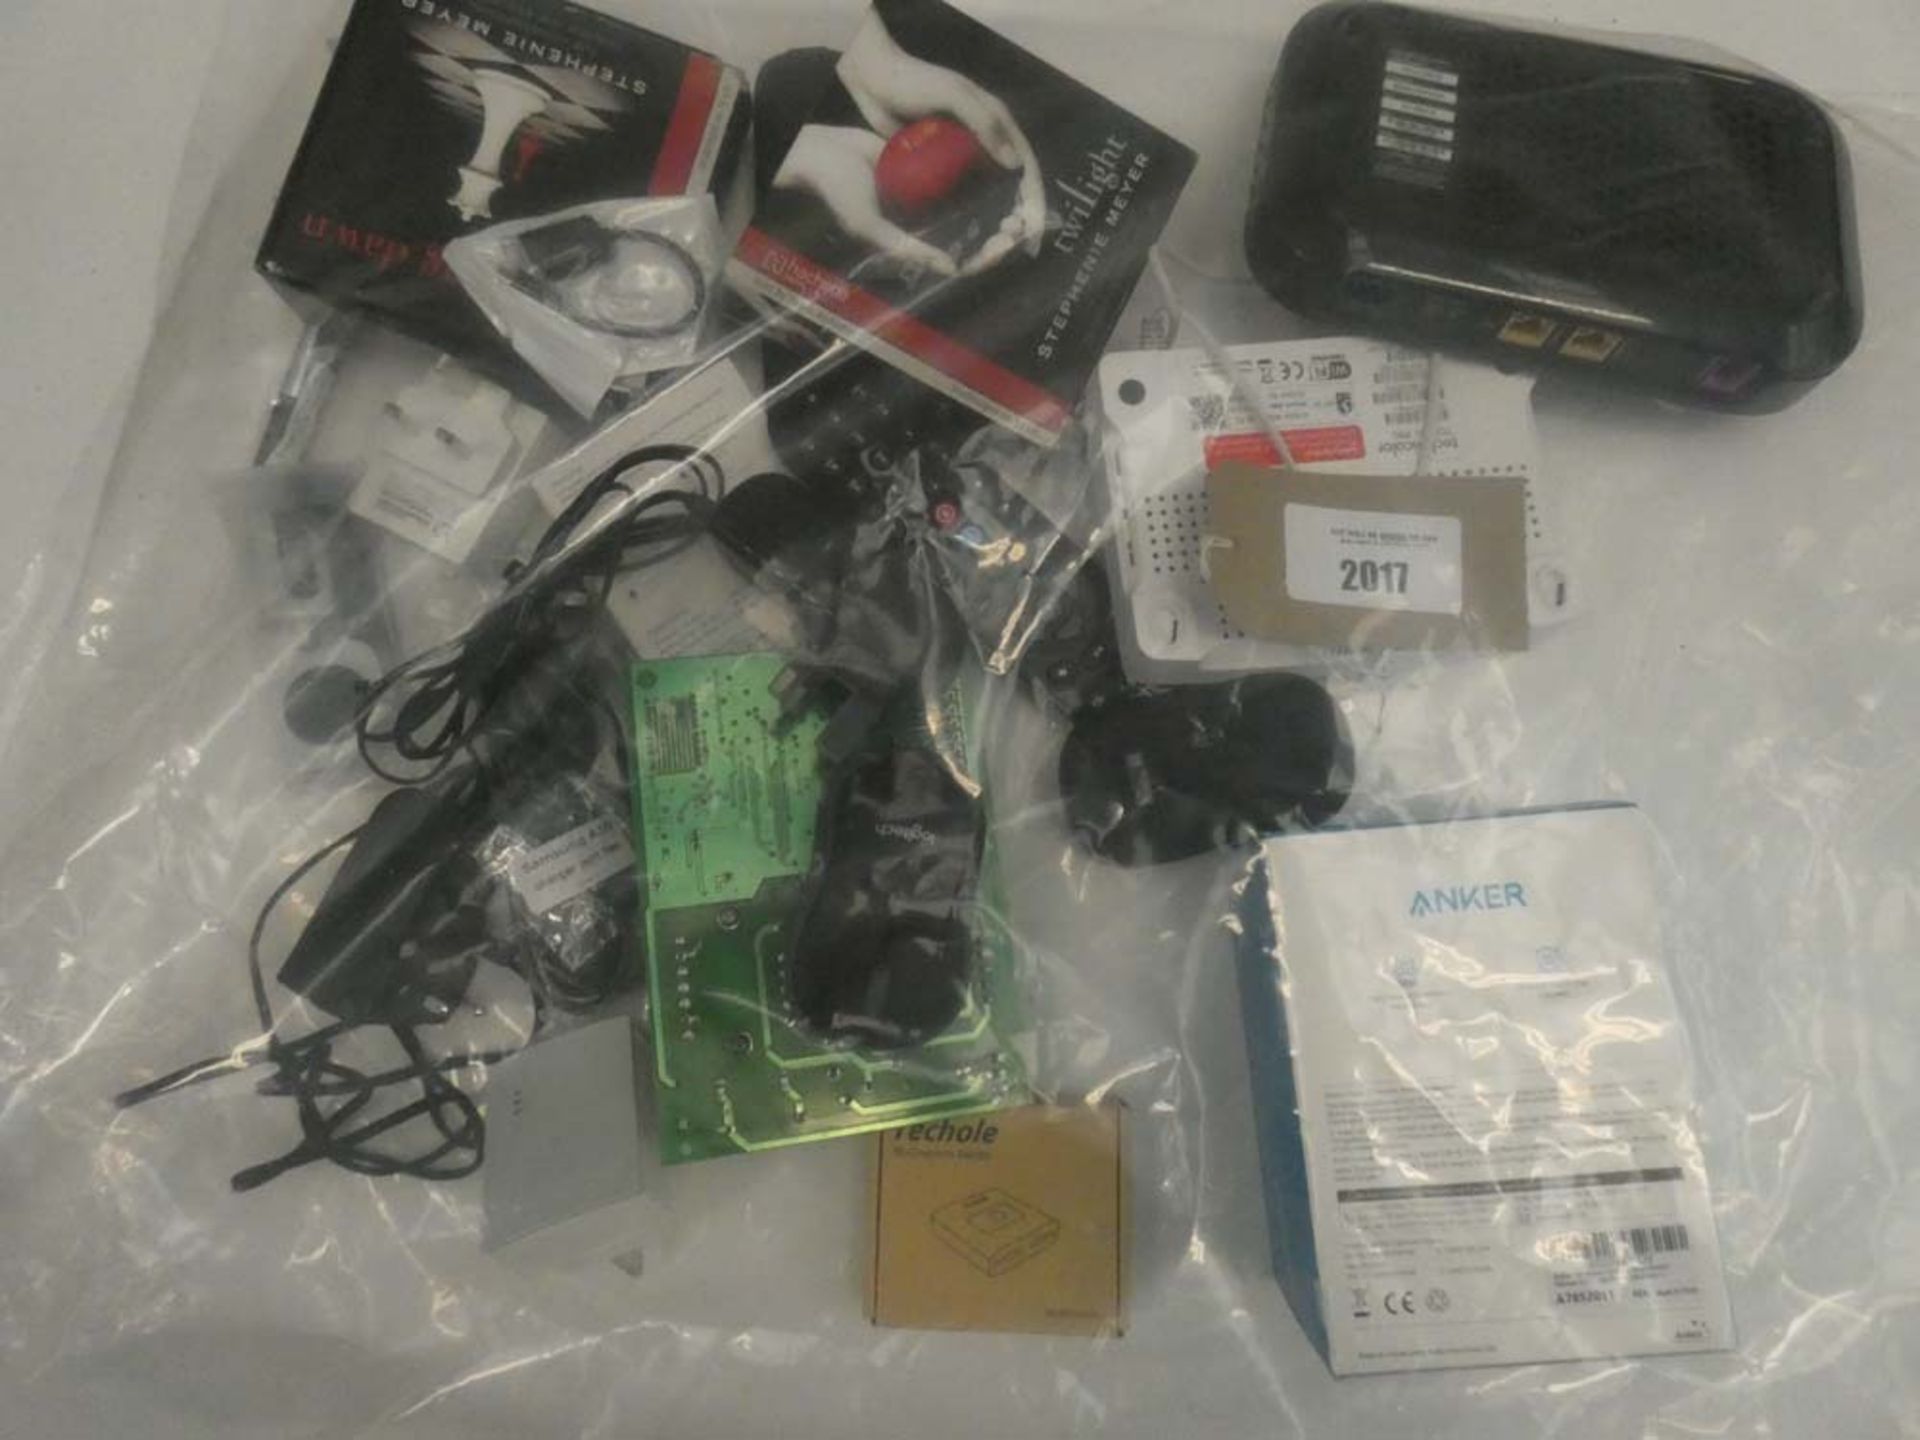 Bag containing quantity of miscellanous electrical related accessories/devices